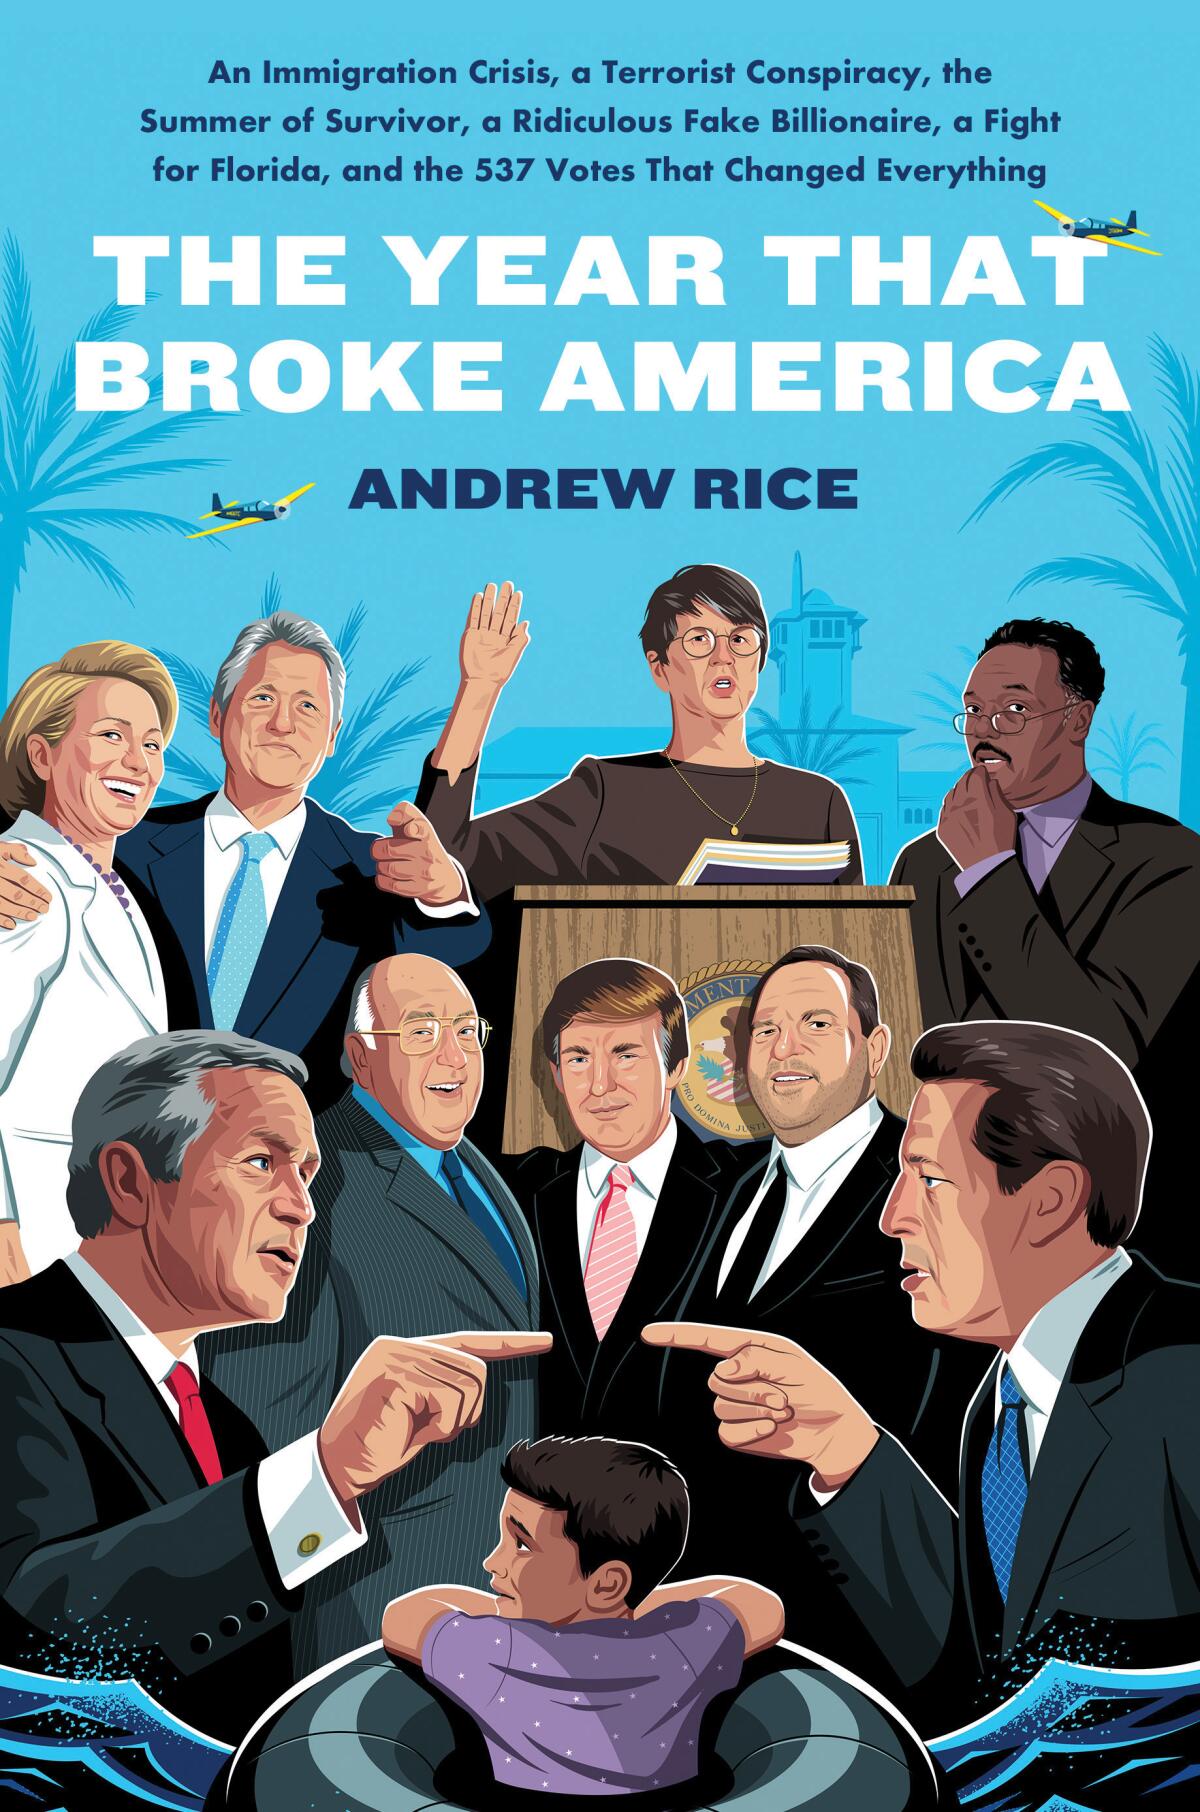 The book jacket for "The Year That Broke America" by Andrew Rice